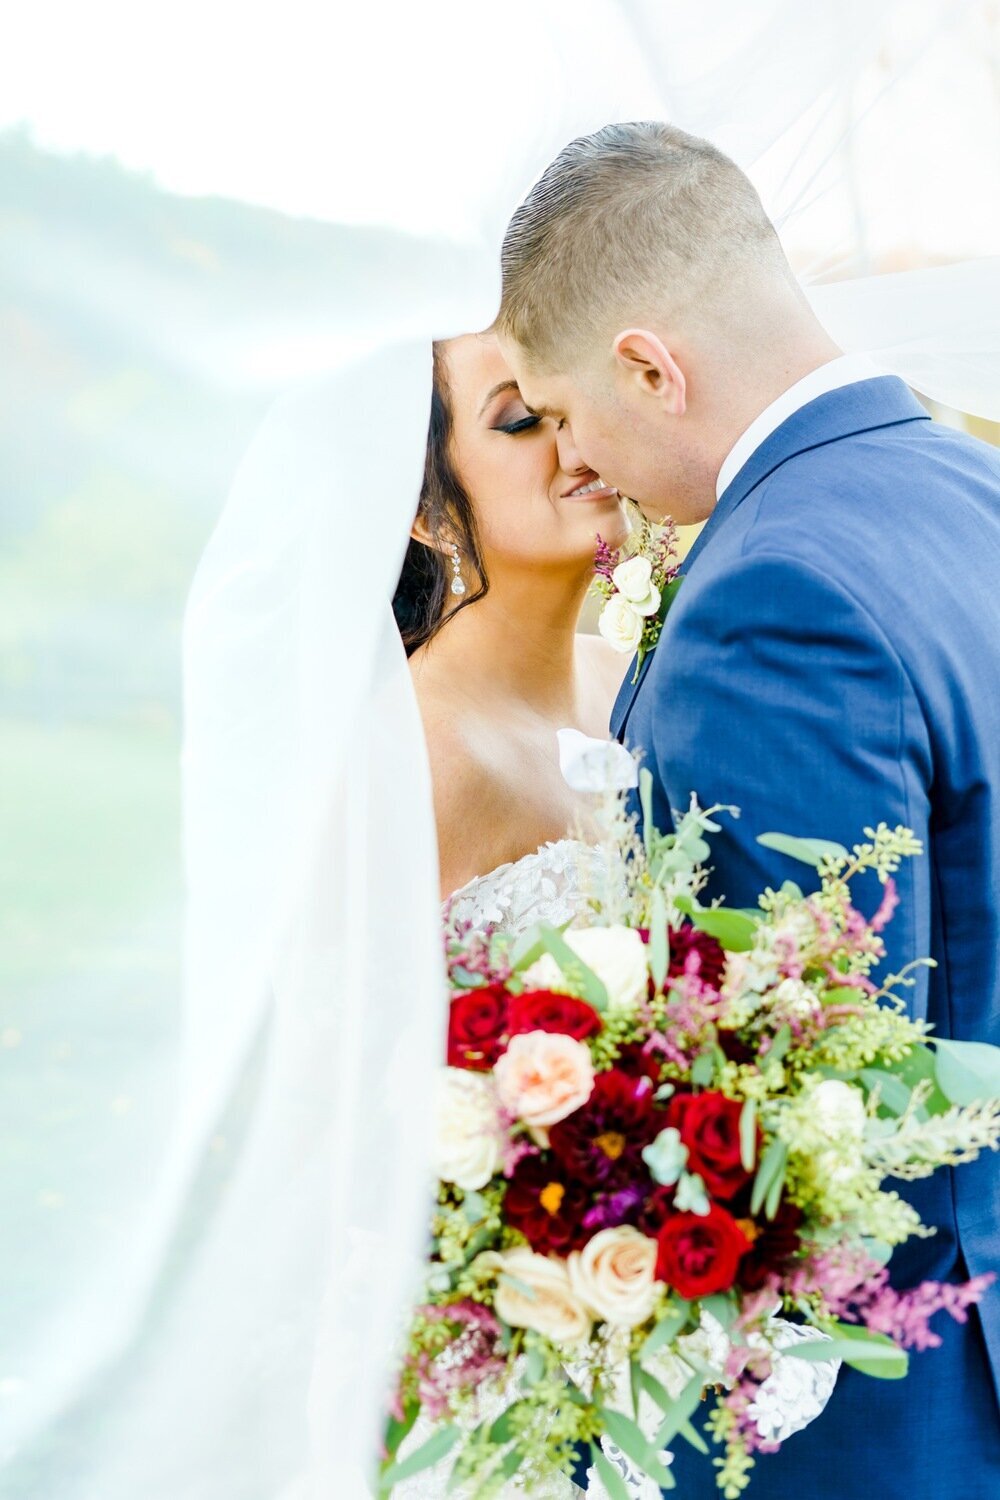 Bride and groom kissing with colorful bouquet